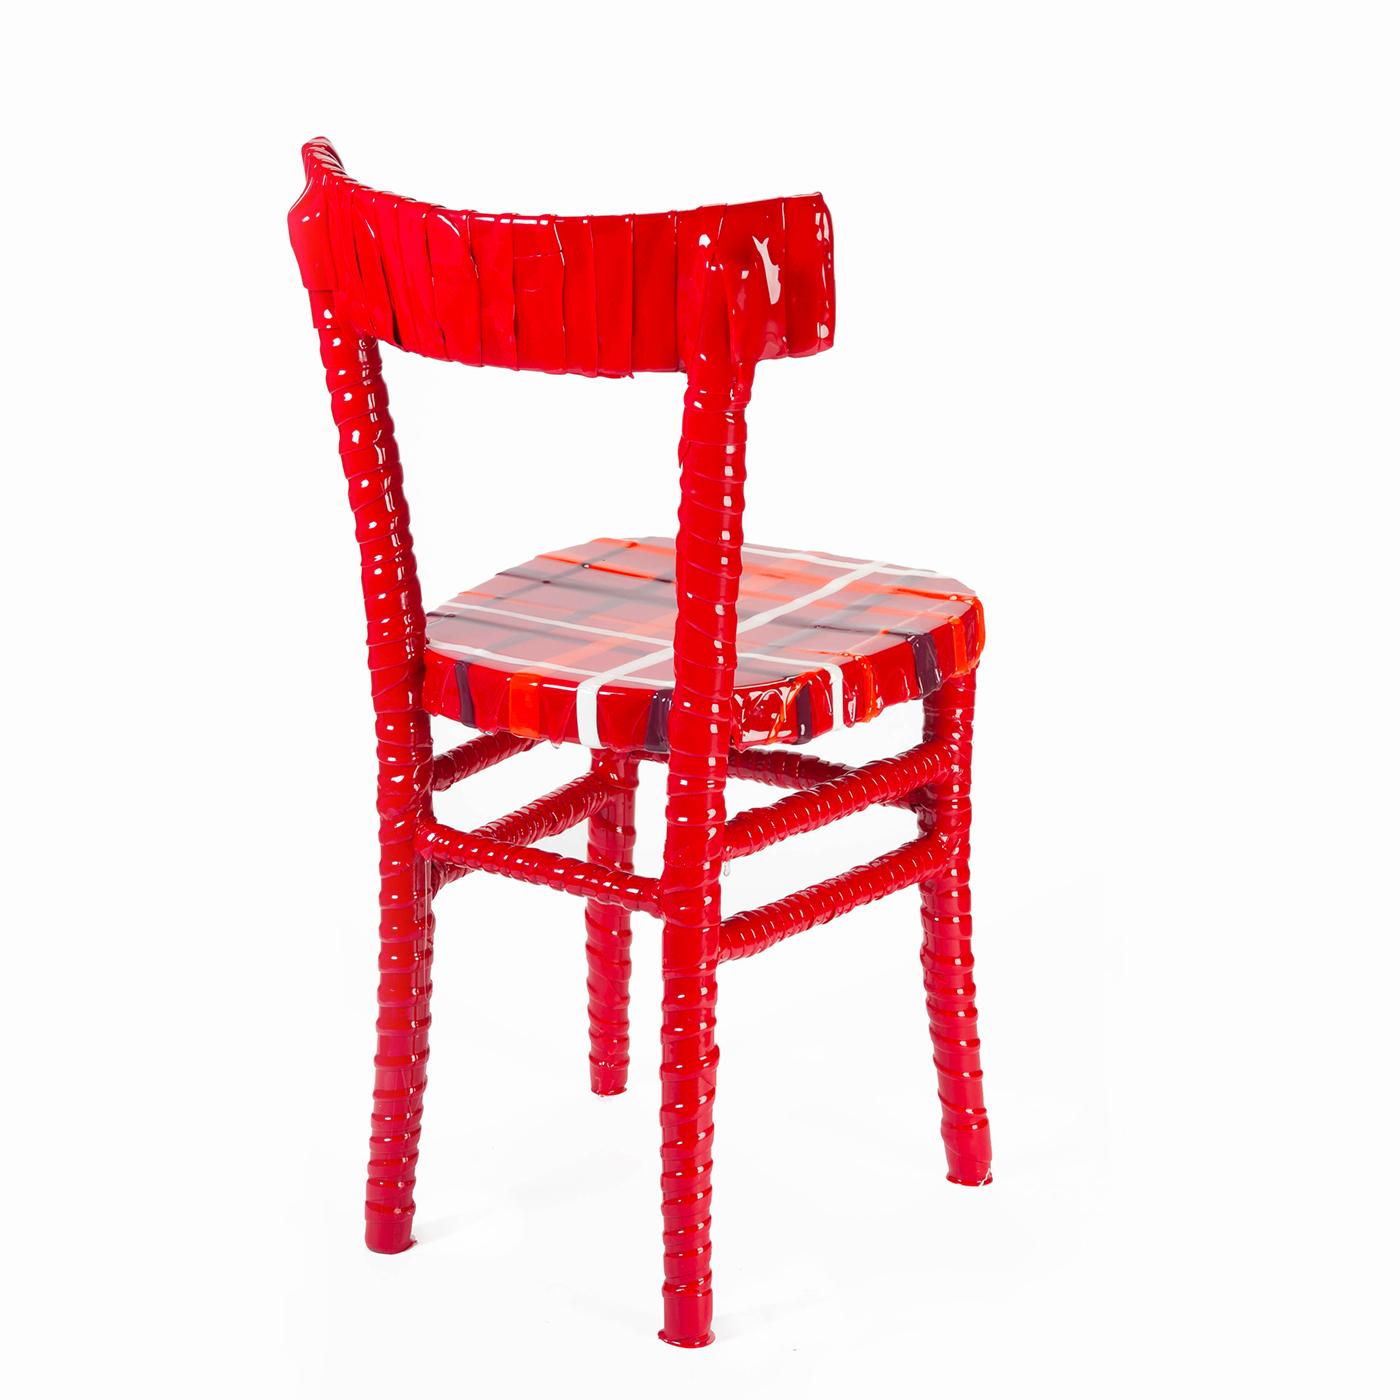 Part of the One-Off Collection by Paola Navona, this upcycled chair is a one of a kind piece. The abandoned wood chair was given a new life with a bright red resin coating, expertly applied by Corsi Design Factory artisans. Making the chair truly